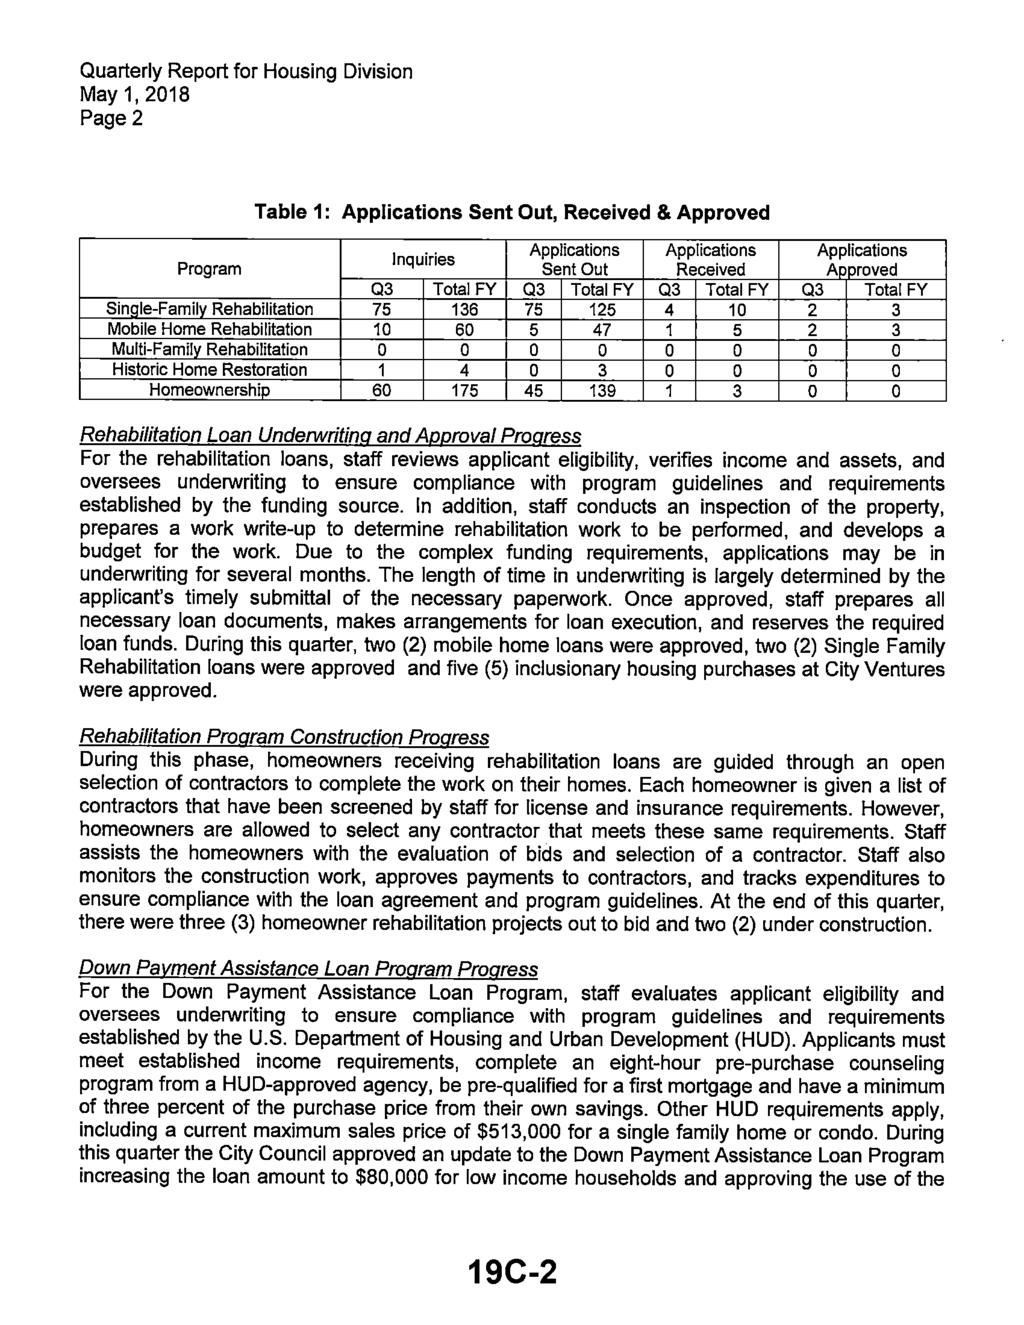 Quarterly Report for Housing Division May 1, 2018 Page 2 Table 1: Applications Sent Out, Received & Approved Program Q3 Inquiries Total FY Applications Q3 Sent Out Total FY Applications Q3 Received